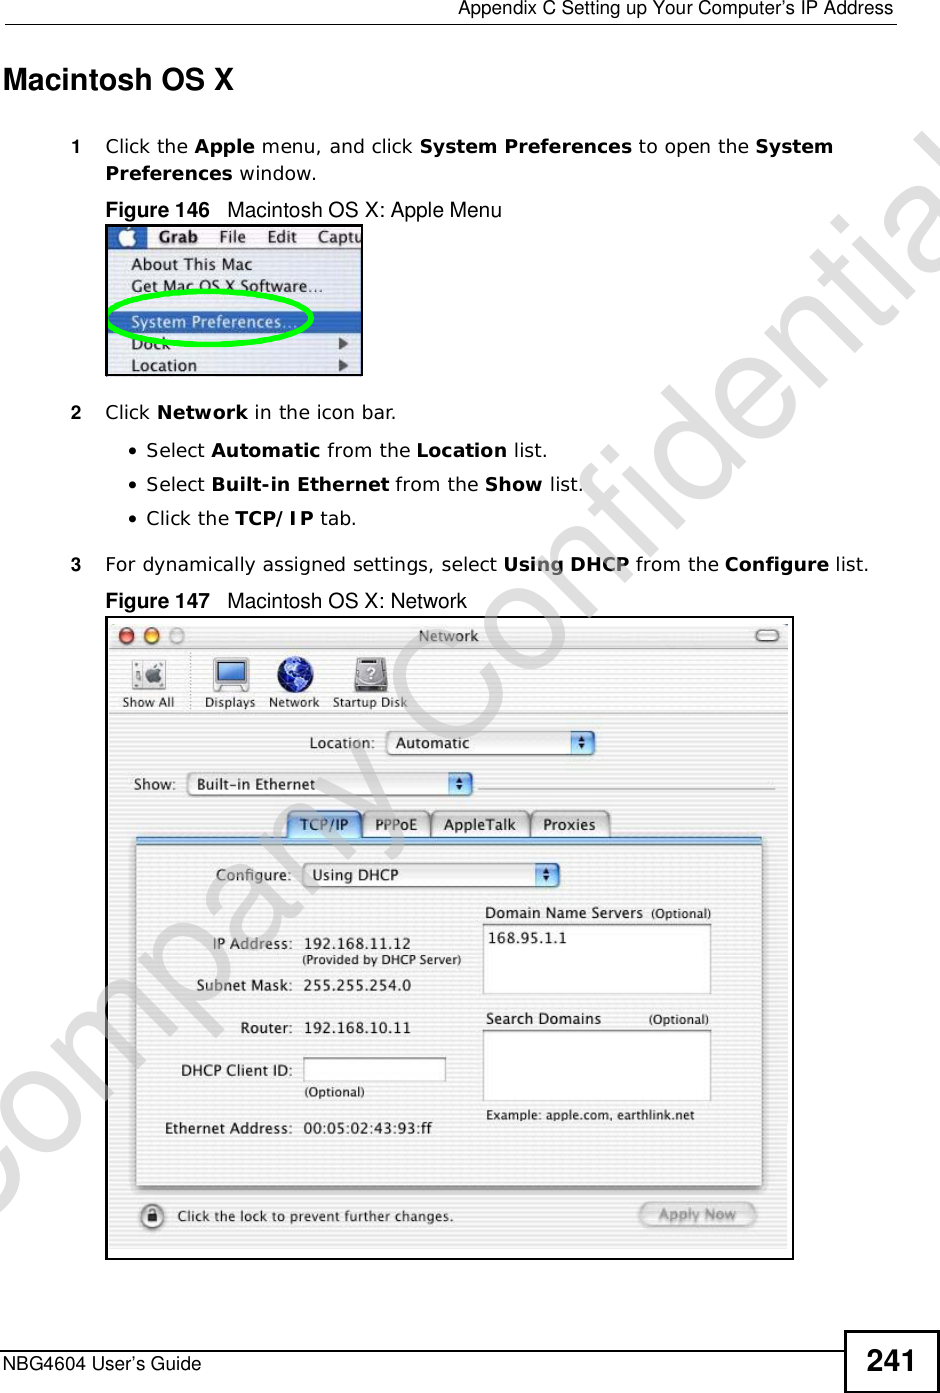  Appendix CSetting up Your Computer’s IP AddressNBG4604 User’s Guide 241Macintosh OS X1Click the Apple menu, and click System Preferences to open the SystemPreferences window.Figure 146   Macintosh OS X: Apple Menu2Click Network in the icon bar.   •Select Automatic from the Location list.•Select Built-in Ethernet from the Show list. •Click the TCP/IP tab.3For dynamically assigned settings, select Using DHCP from the Configure list.Figure 147   Macintosh OS X: NetworkCompany Confidential